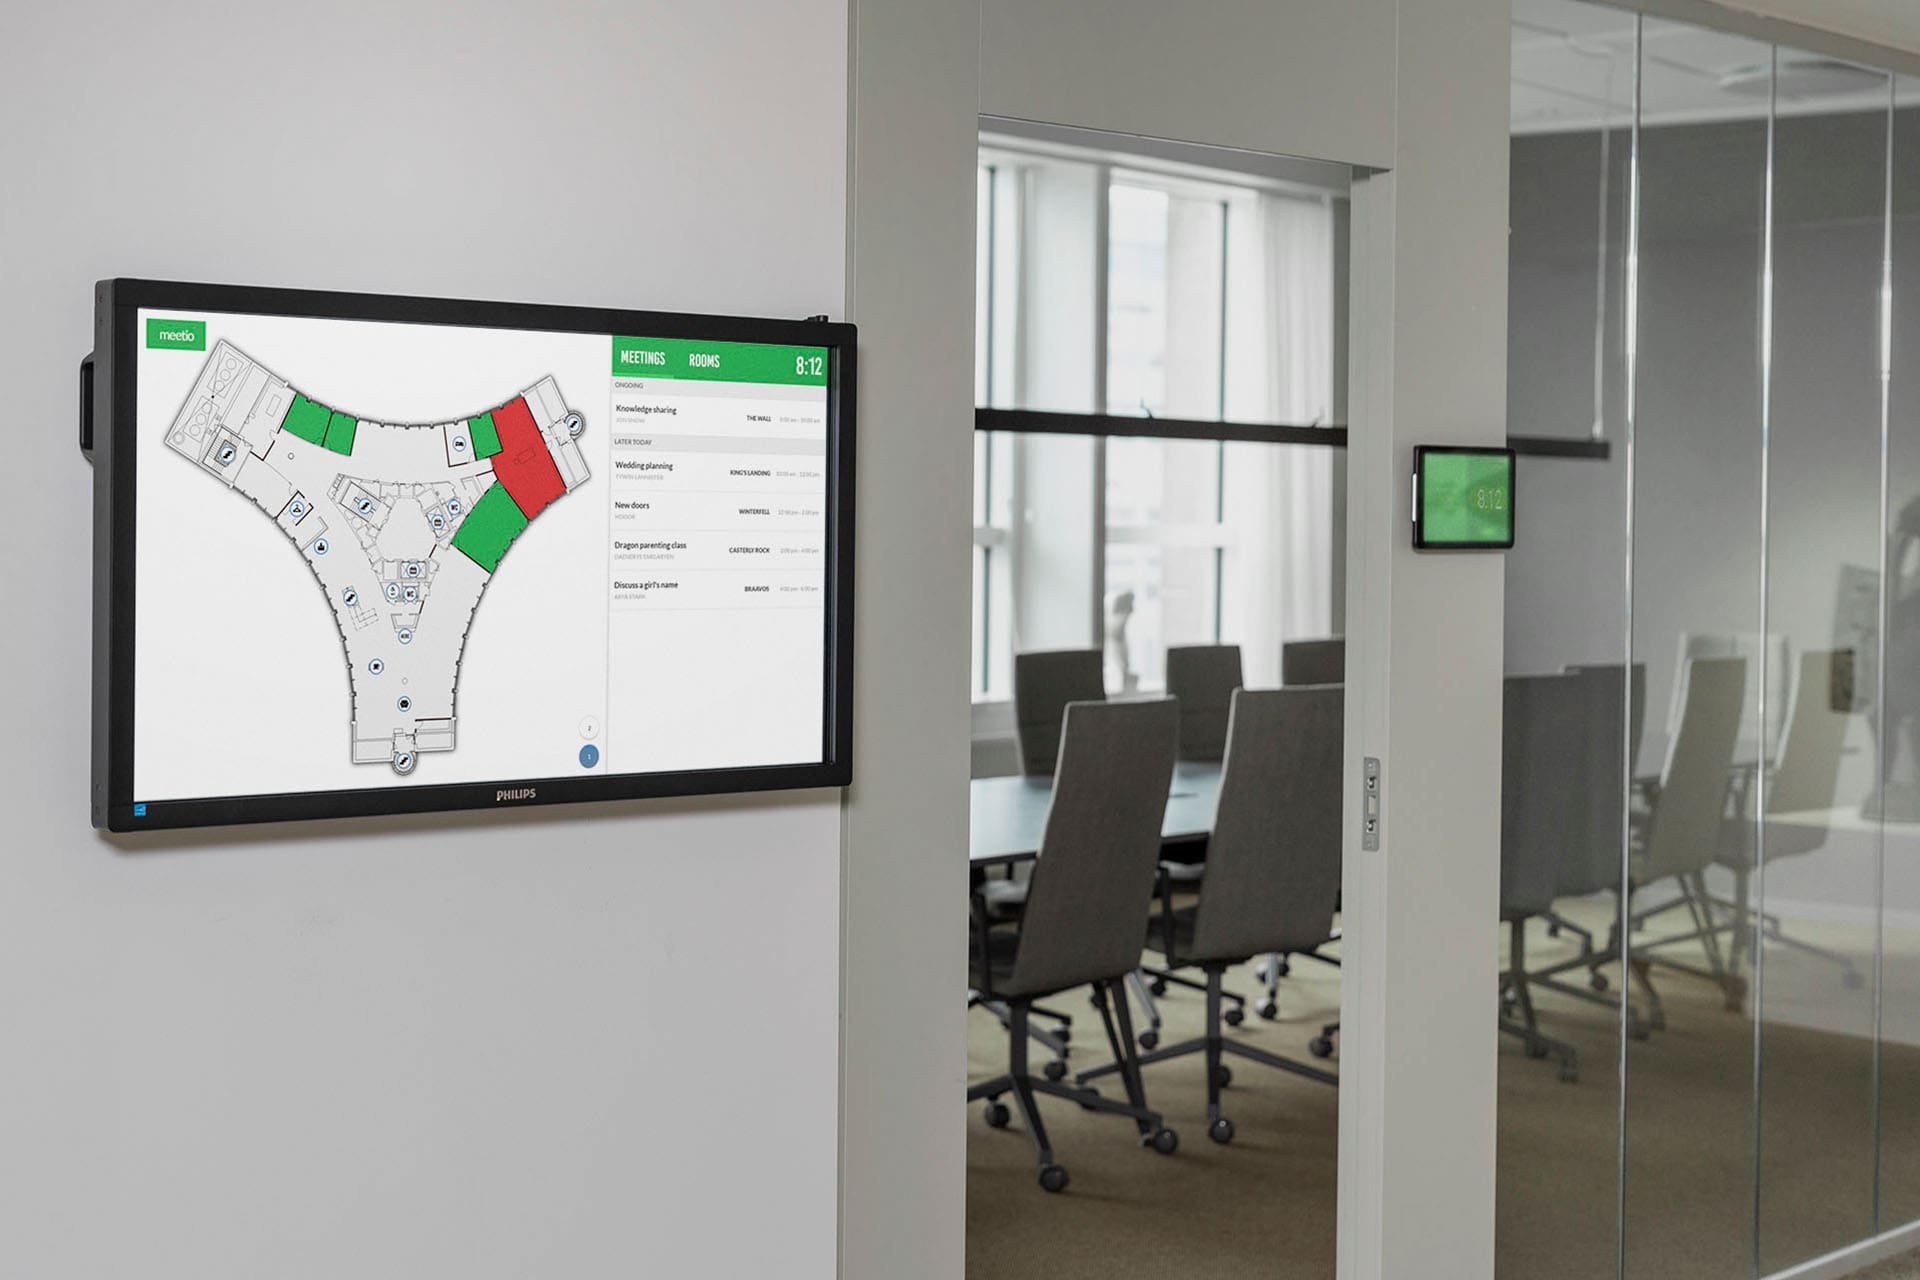 Large touch screen with Meetio View map outside a meeting room